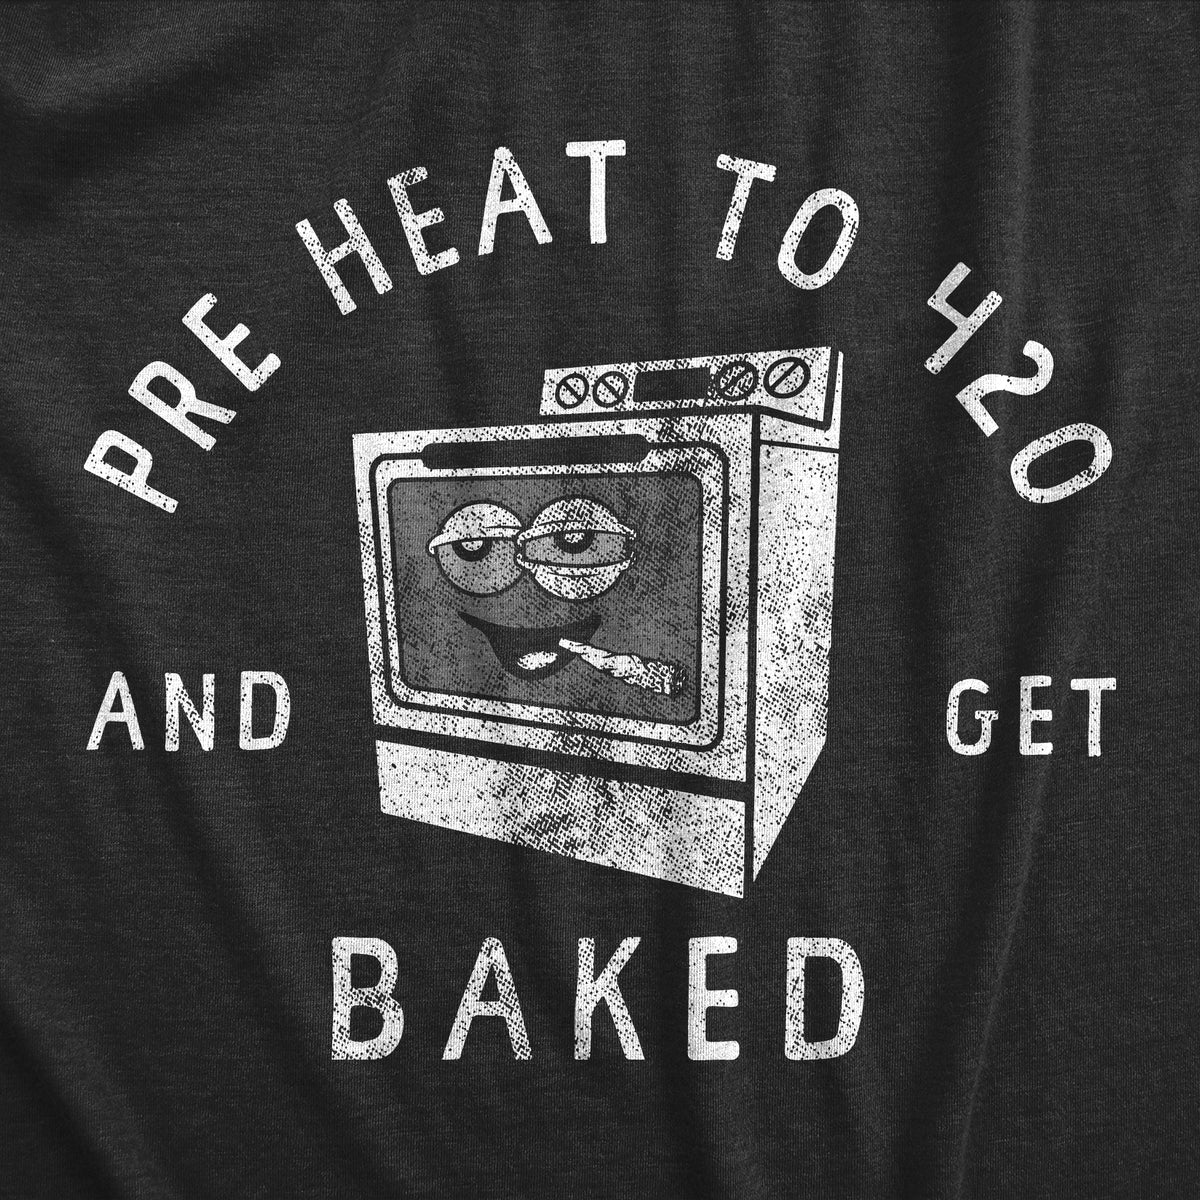 Pre Heat To 420 And Get Baked Cookout Apron